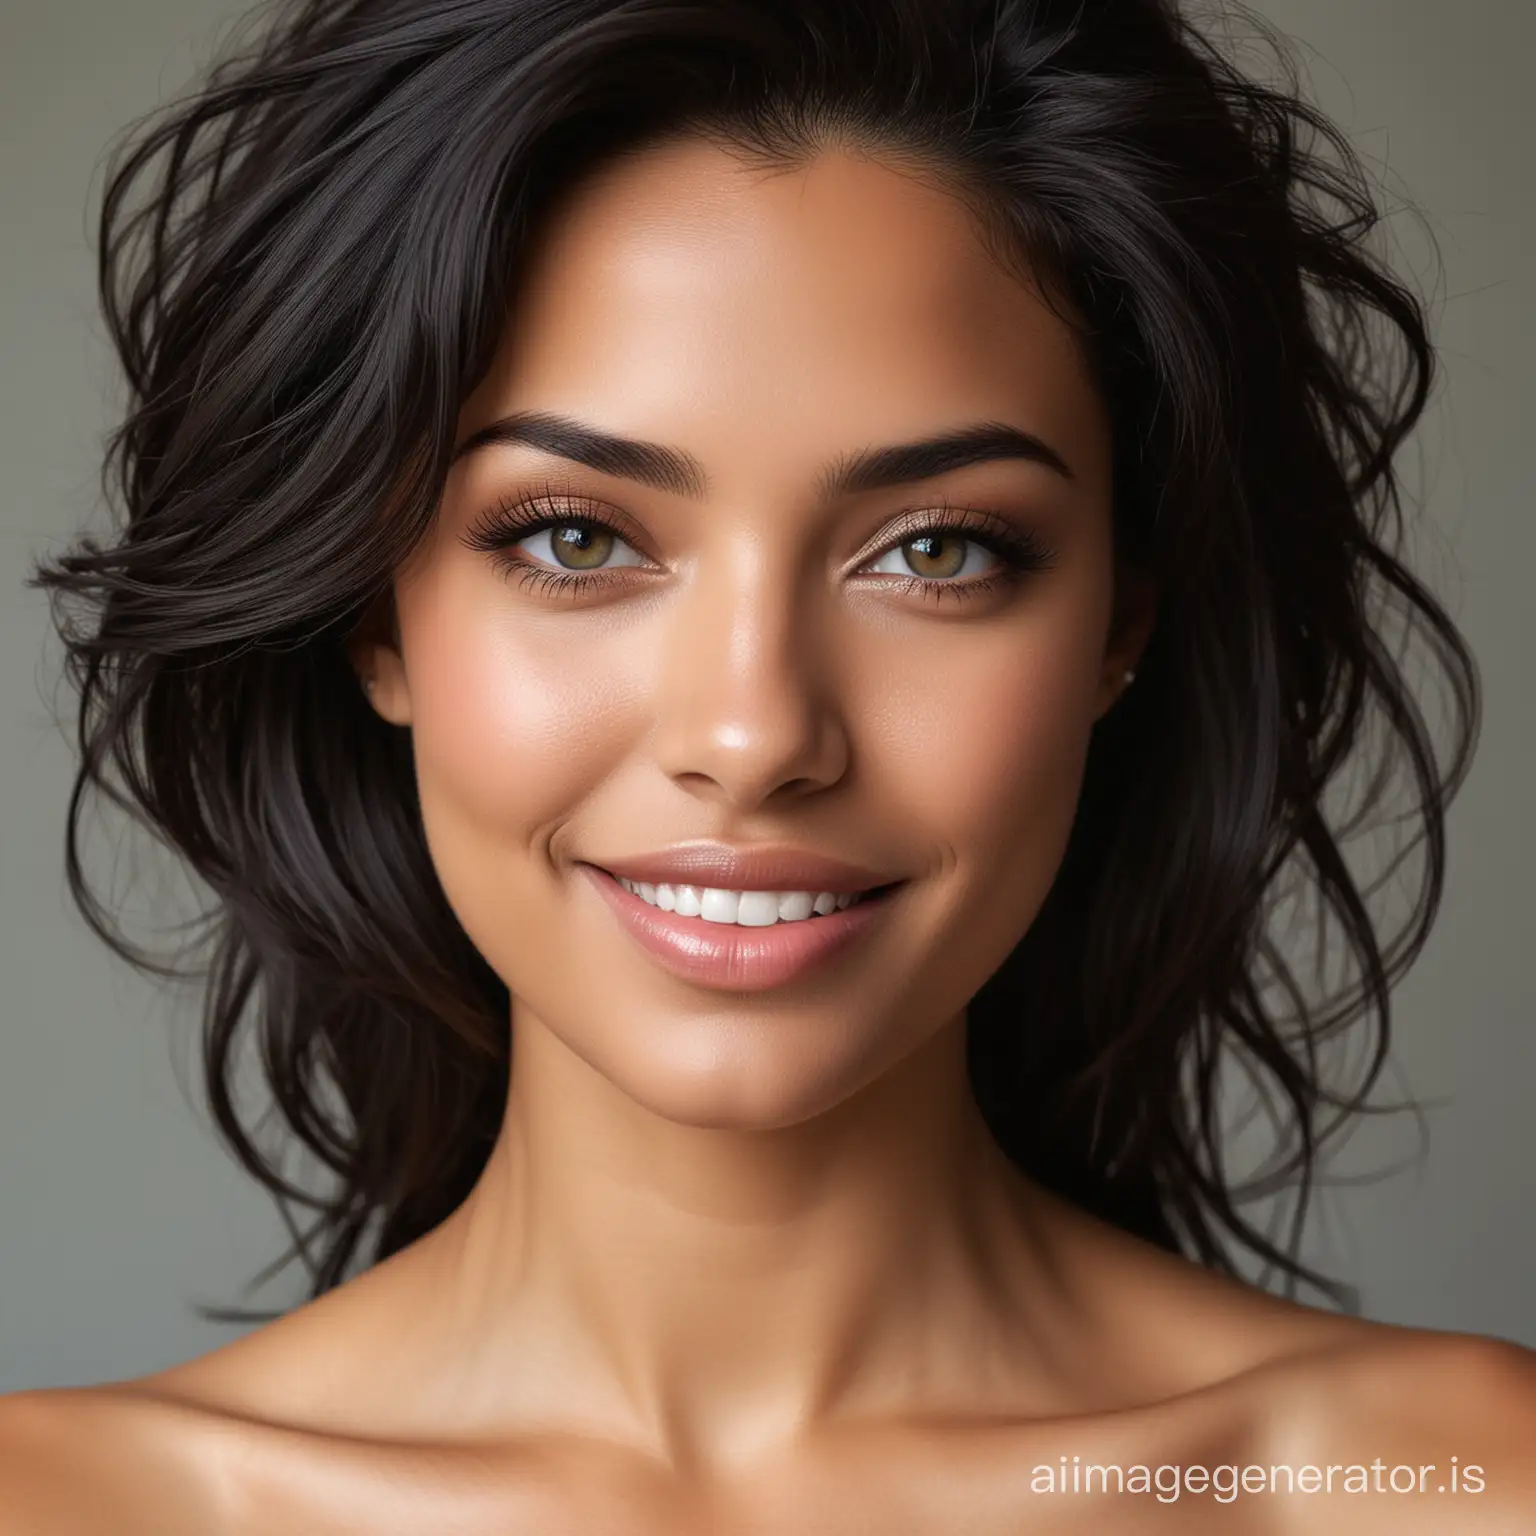 Radiant-Black-Woman-with-Captivating-Smile-and-Graceful-Presence